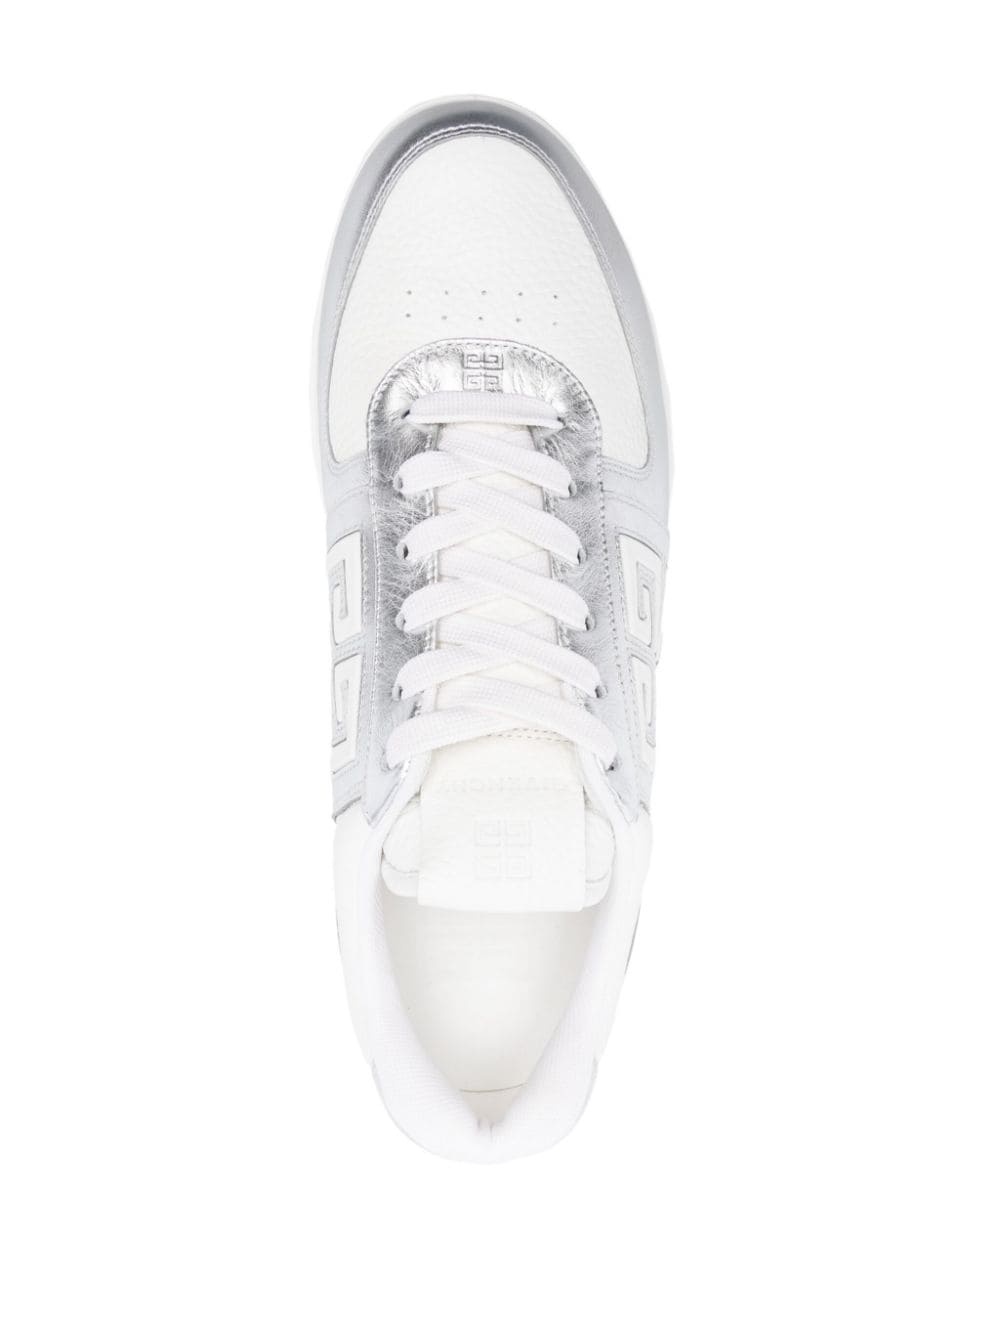 4G-embellished leather sneakers - 4